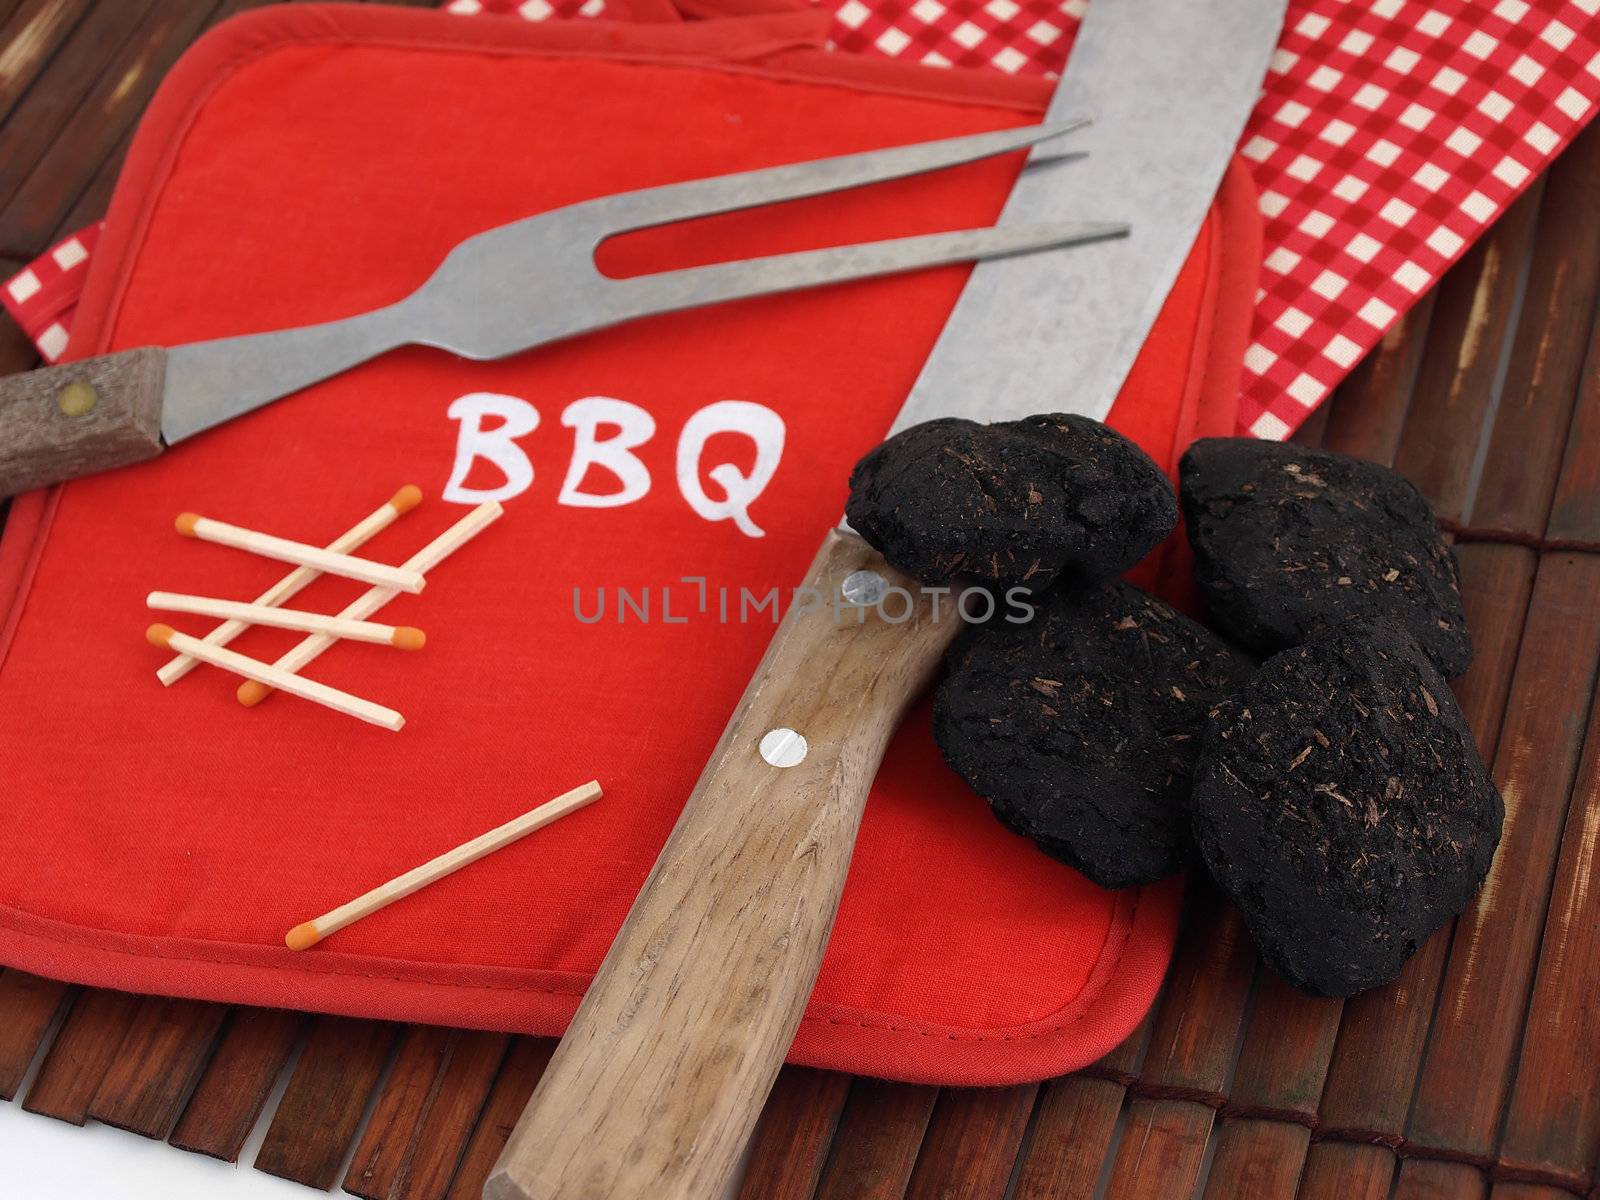 Items used for a Barbeque, including charcoal, wooden matches and a bright red pot holder.